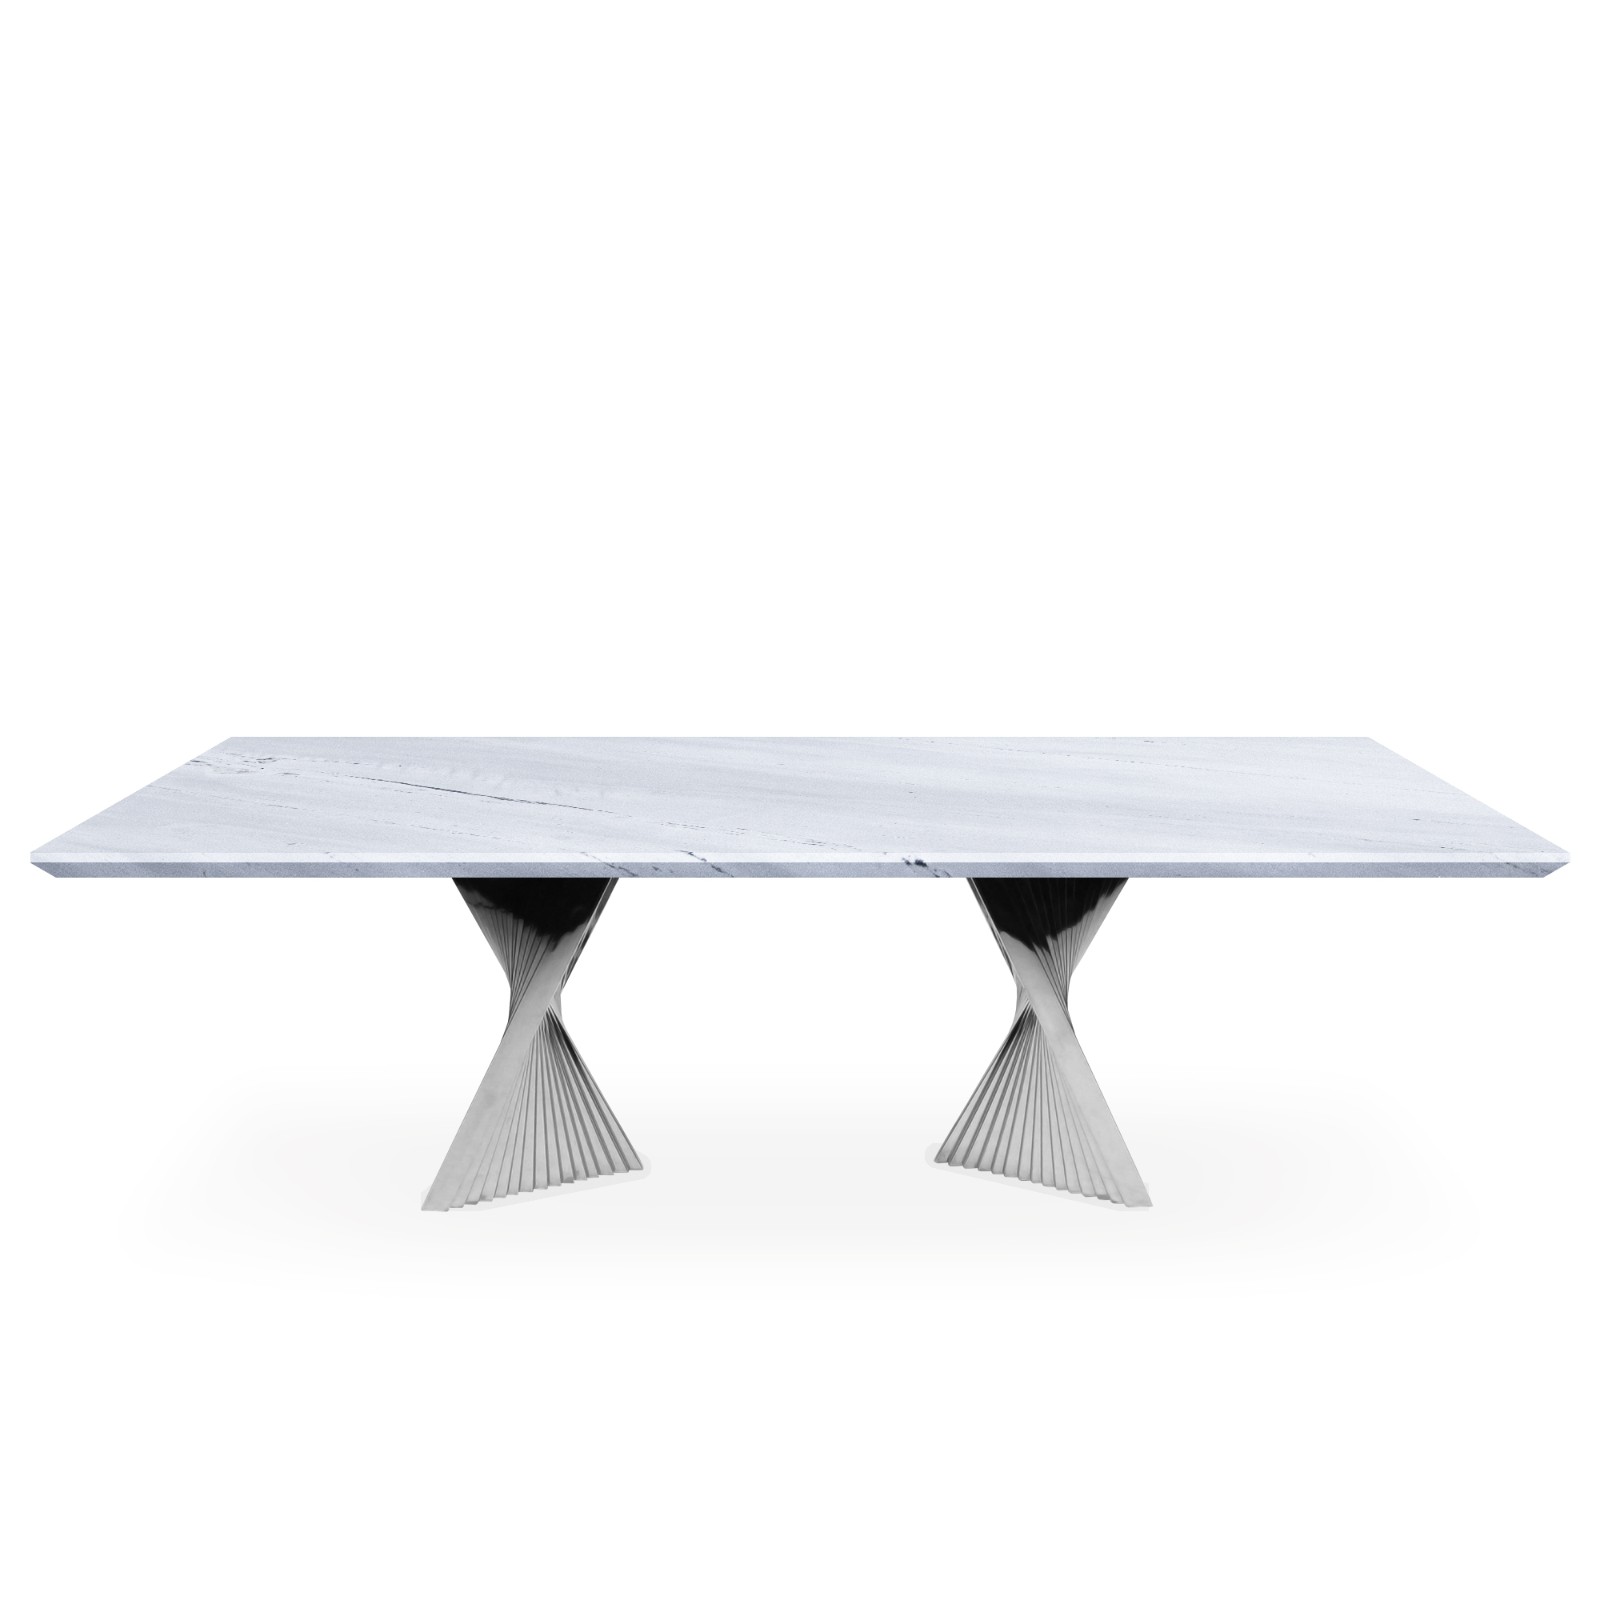 Moore | Art Series | Decasa Marble Marble Dining Table